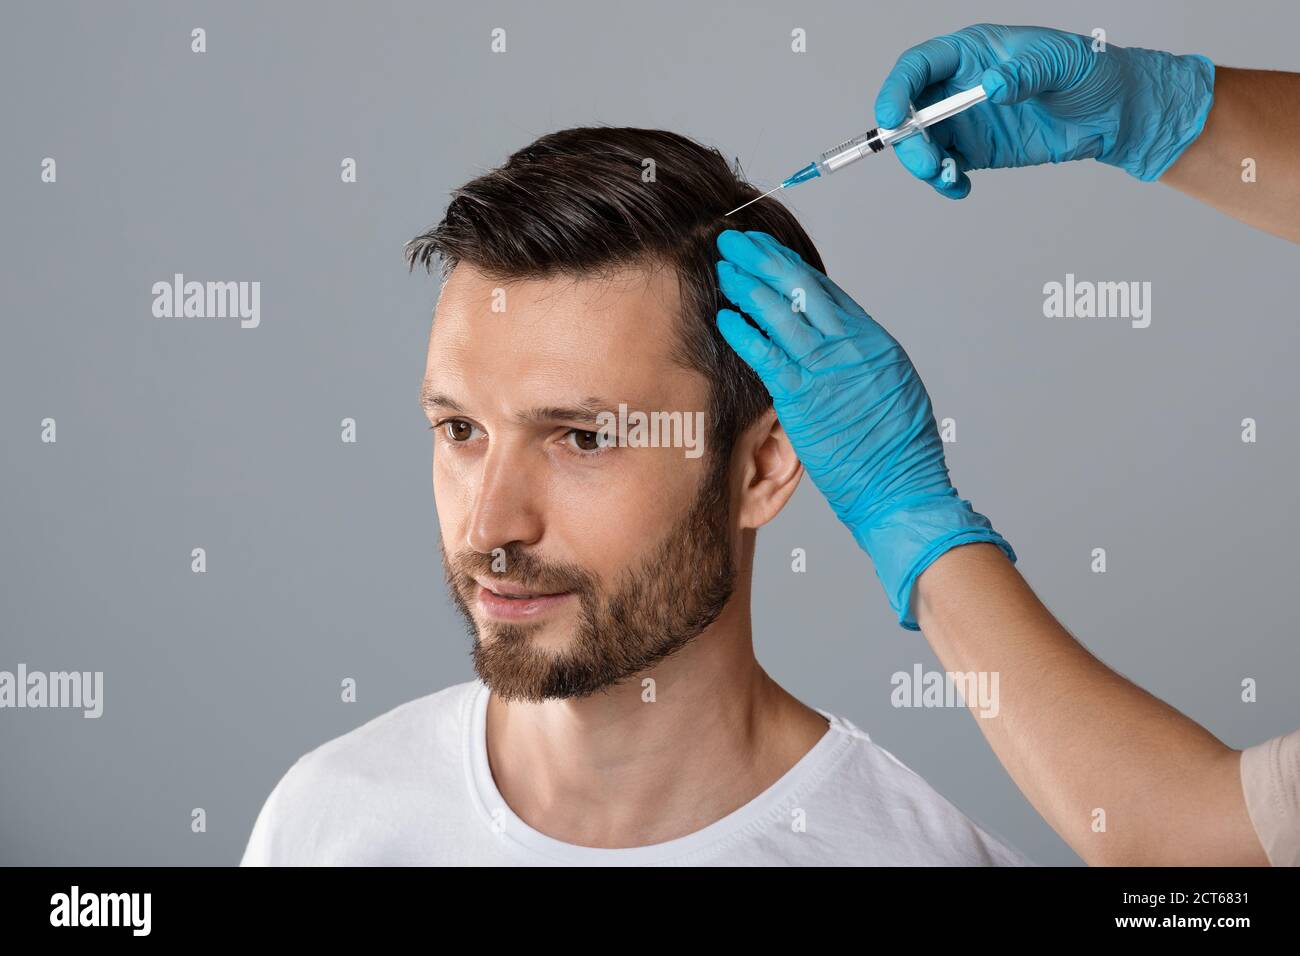 Mesotherapy for hair. Man receiving injections in head Stock Photo